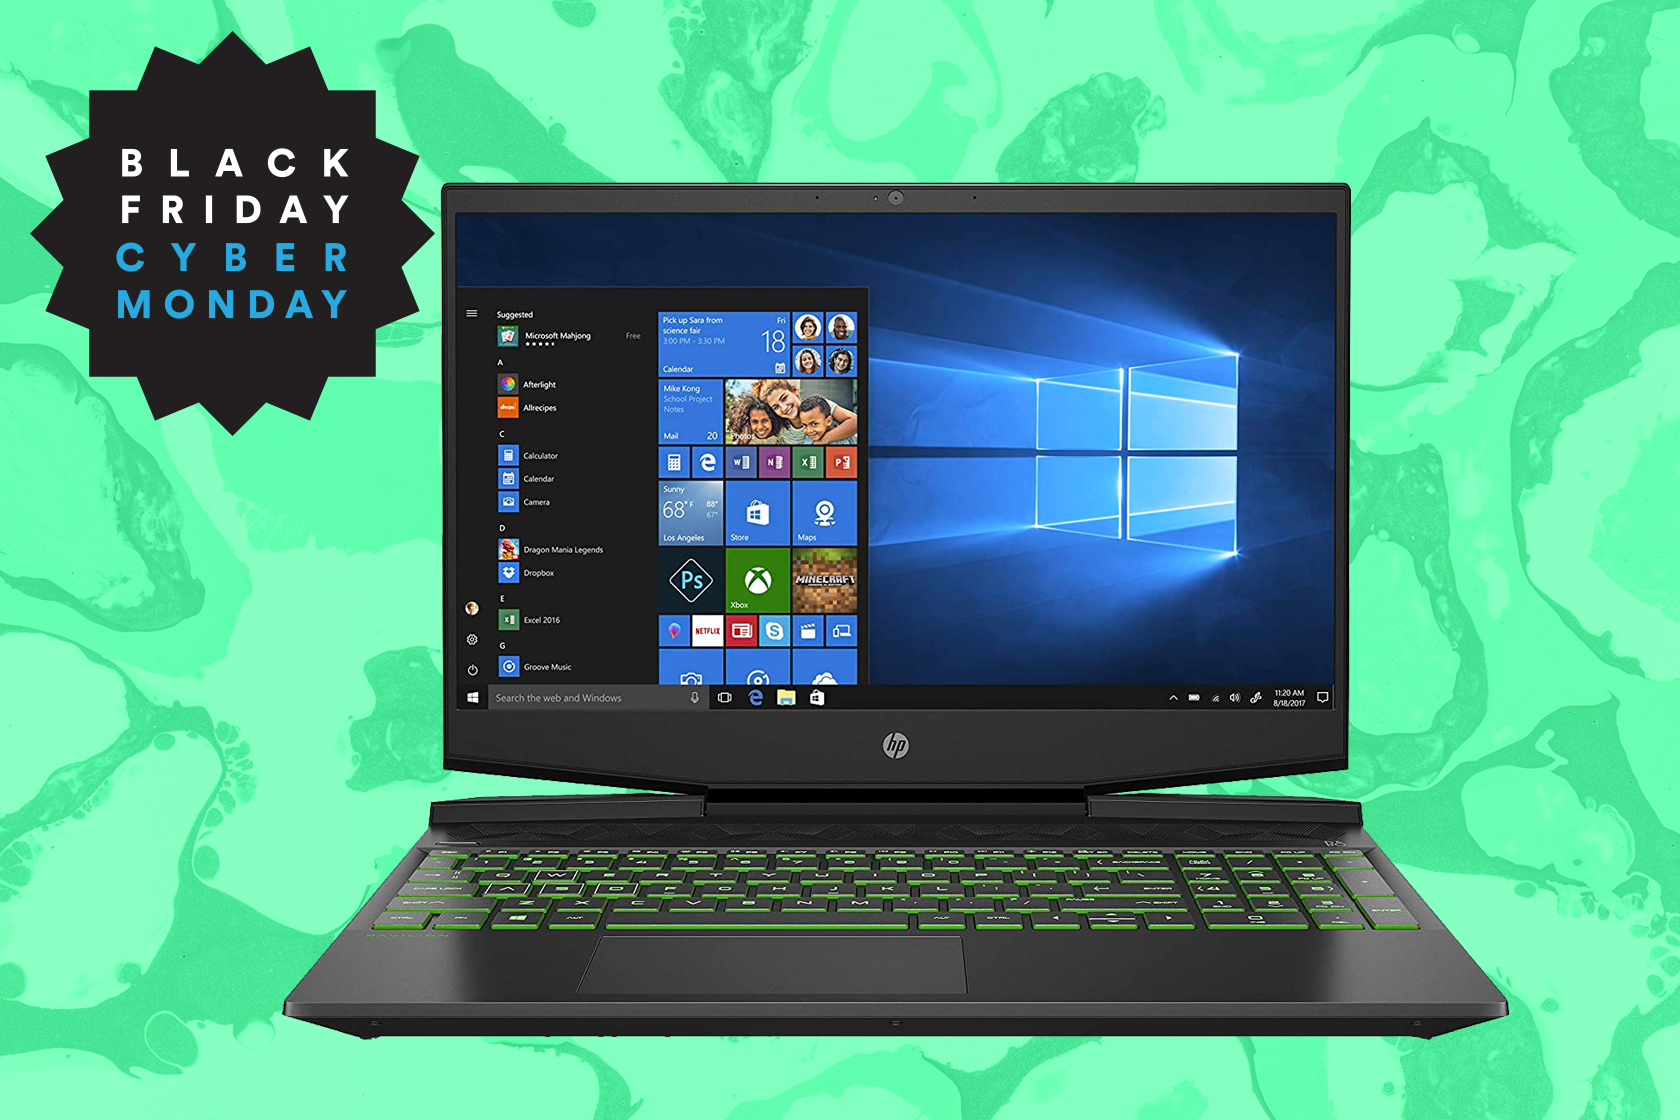 This budget HP gaming laptop is perfect for virtual learning, too